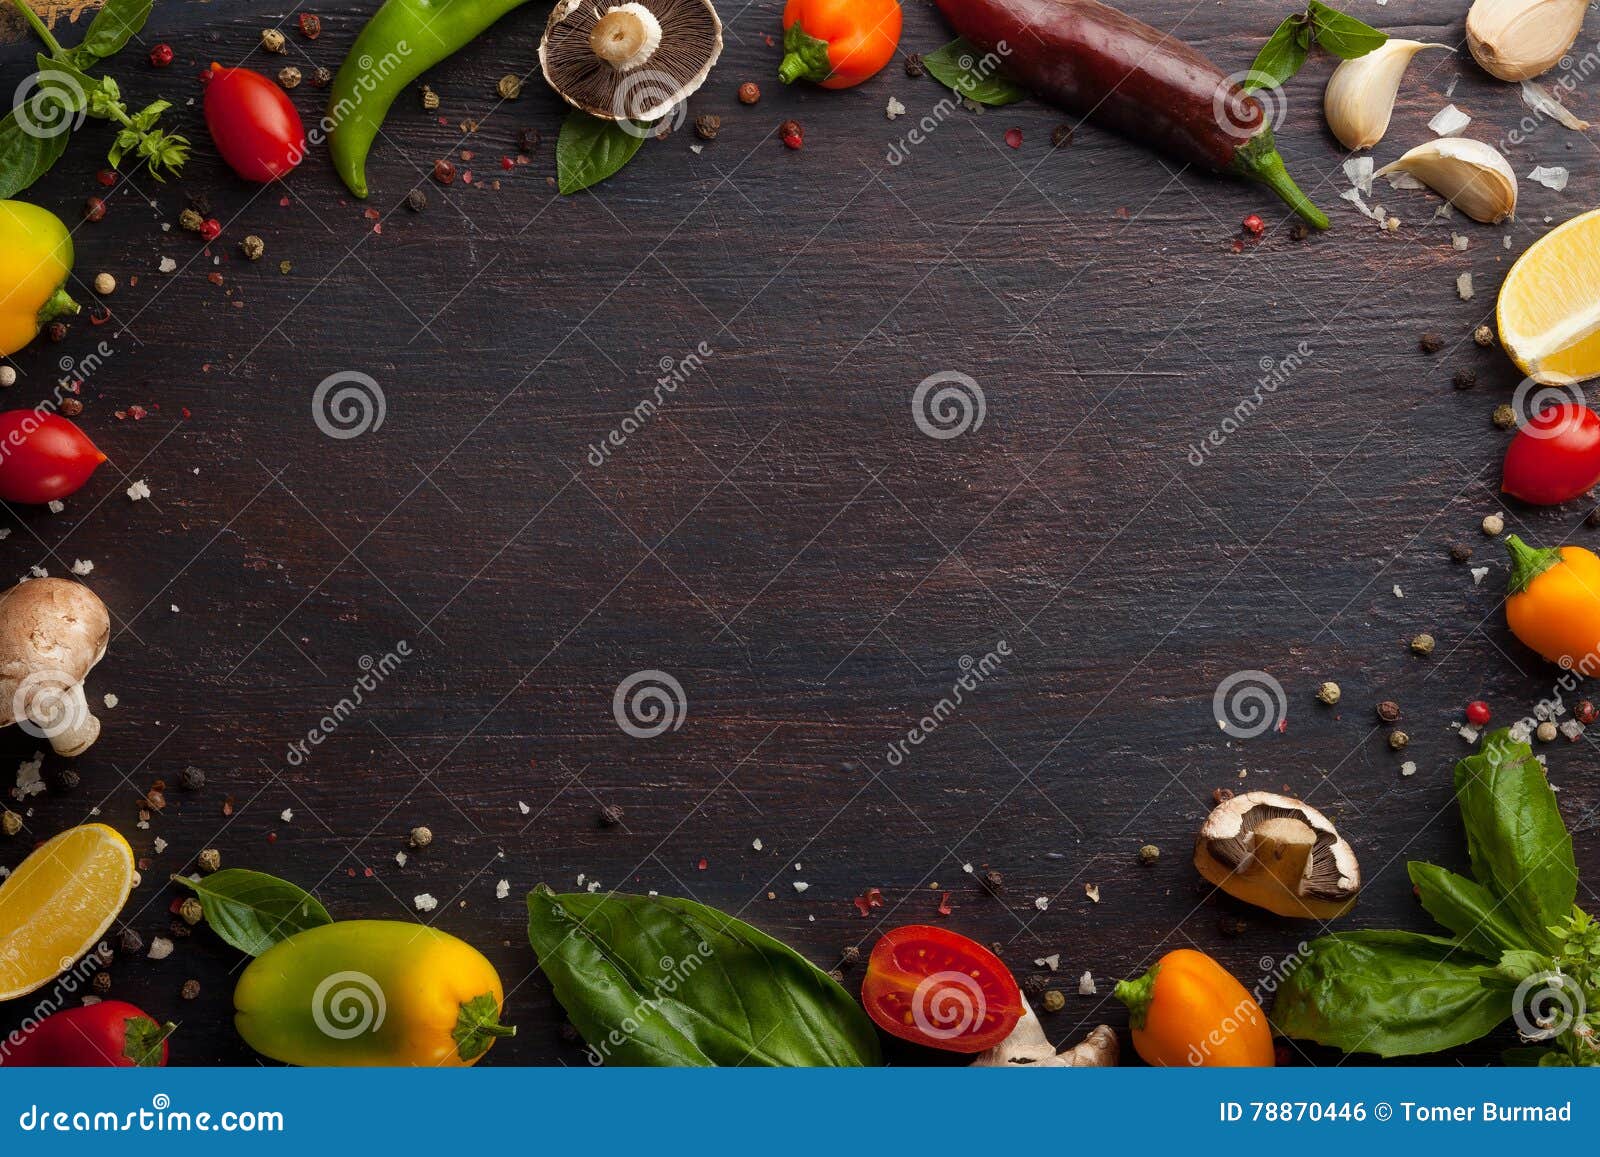 Various Vegetables and Herbs on Dark Wood Table Stock Photo - Image of ...